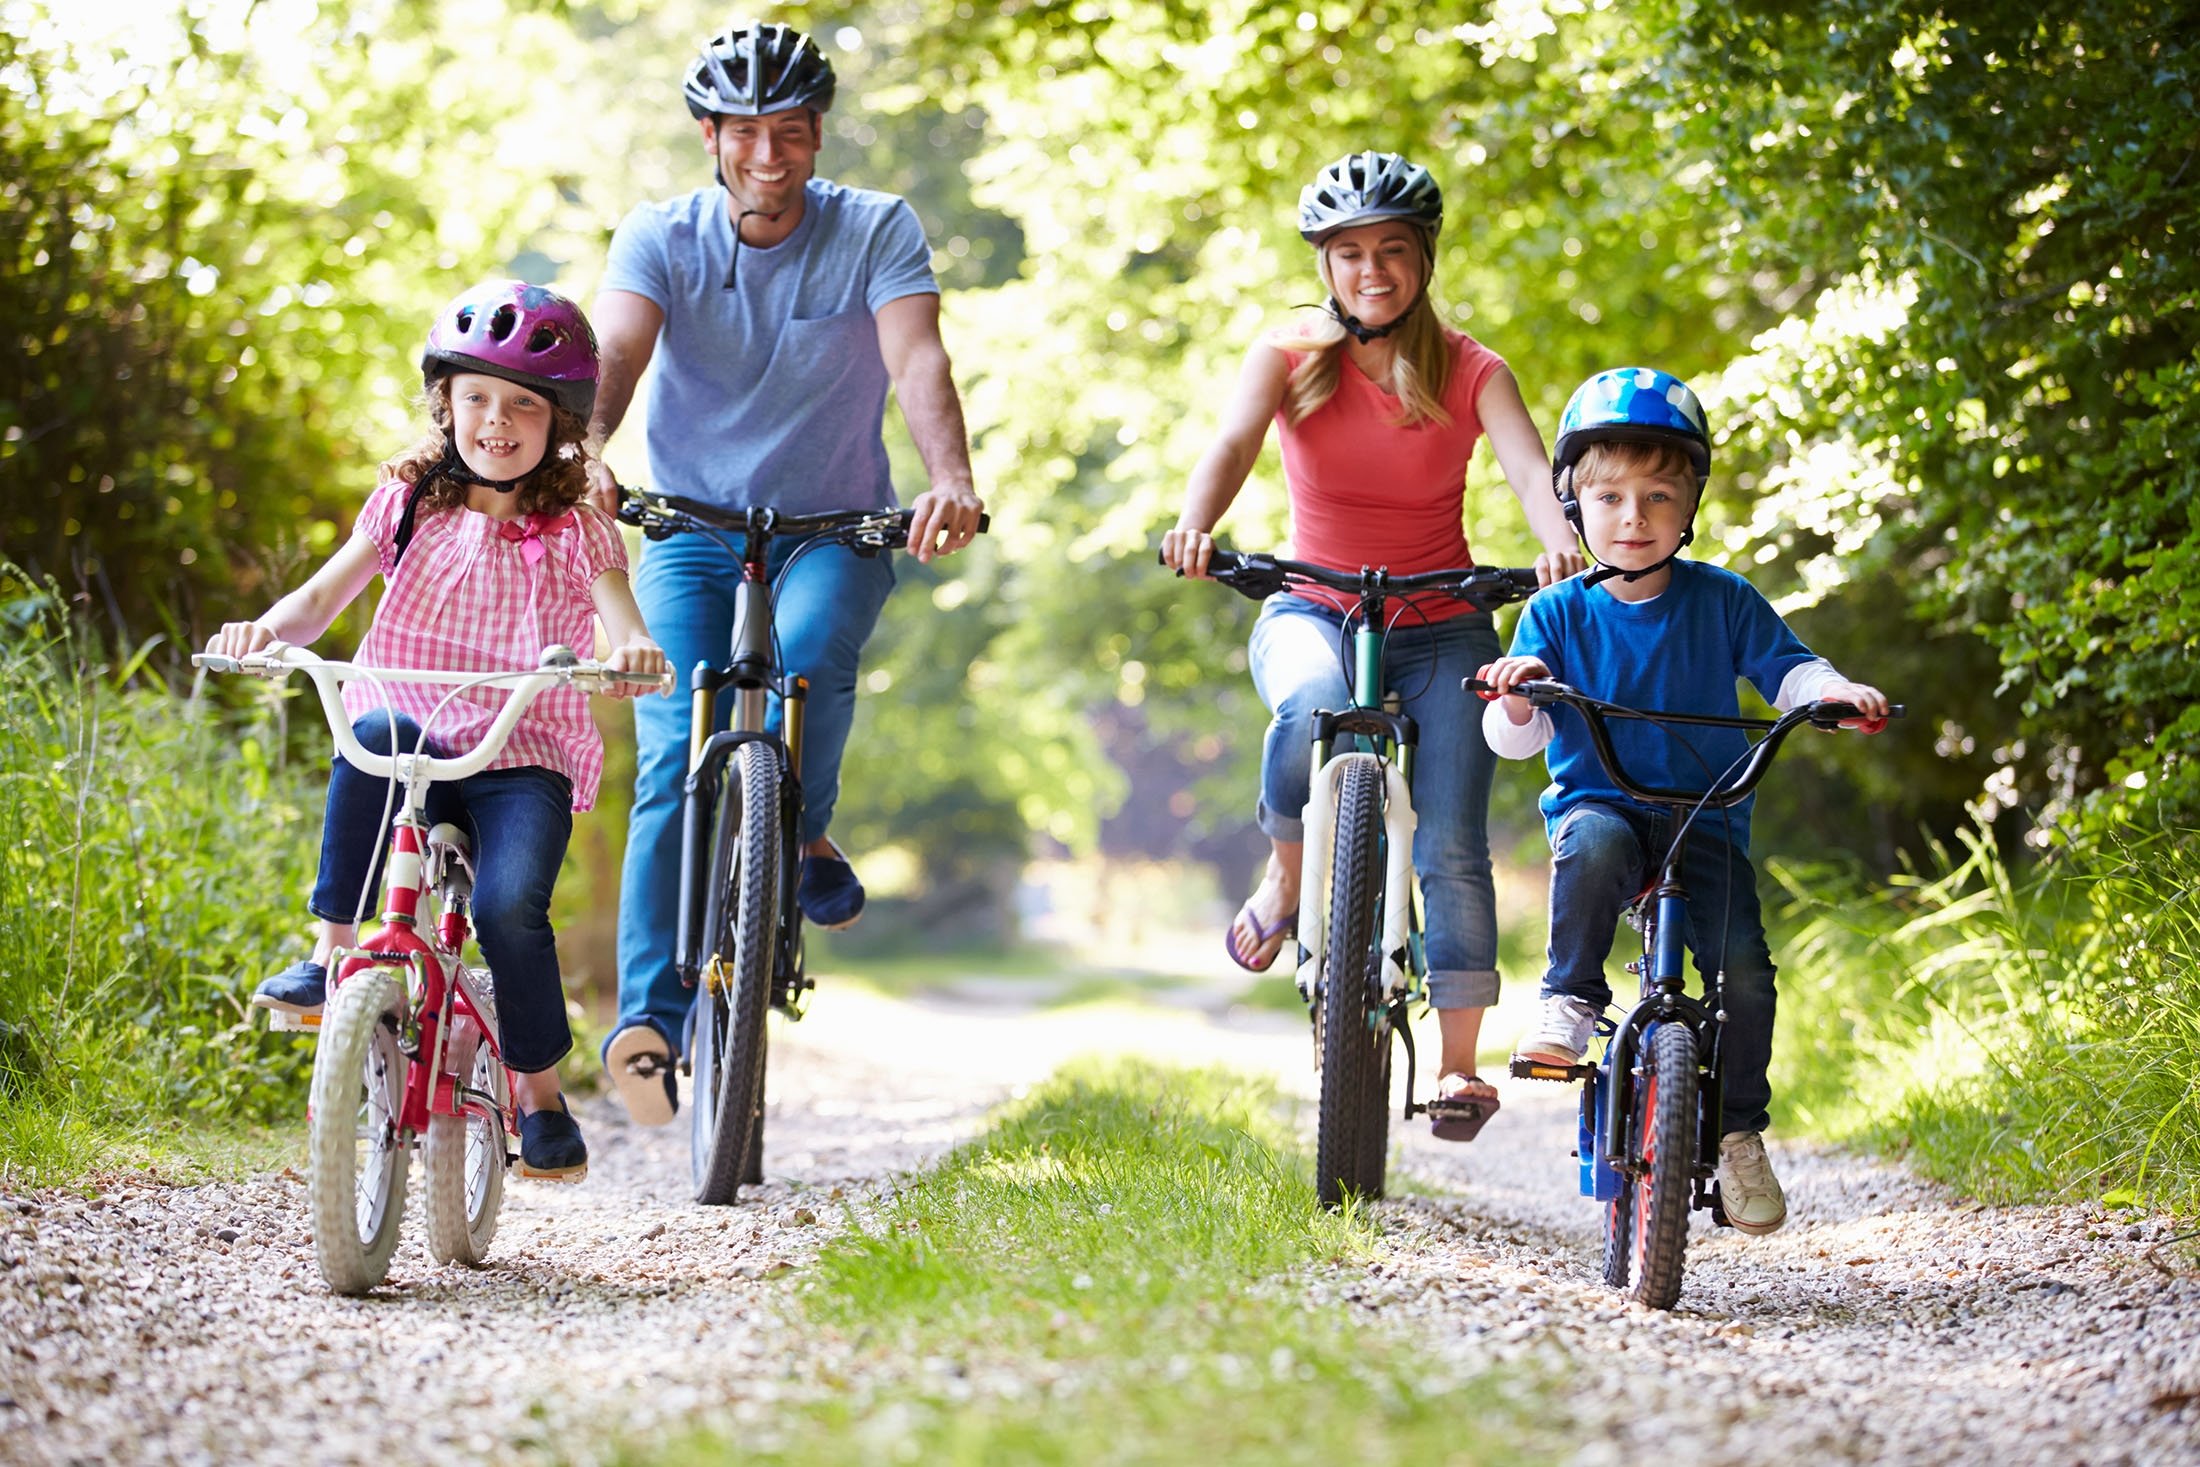 There is no complete consensus among historians about the invention of the bicycle, the most well-known fuel-free personal transportation vehicle. (Shutterstock Photo)